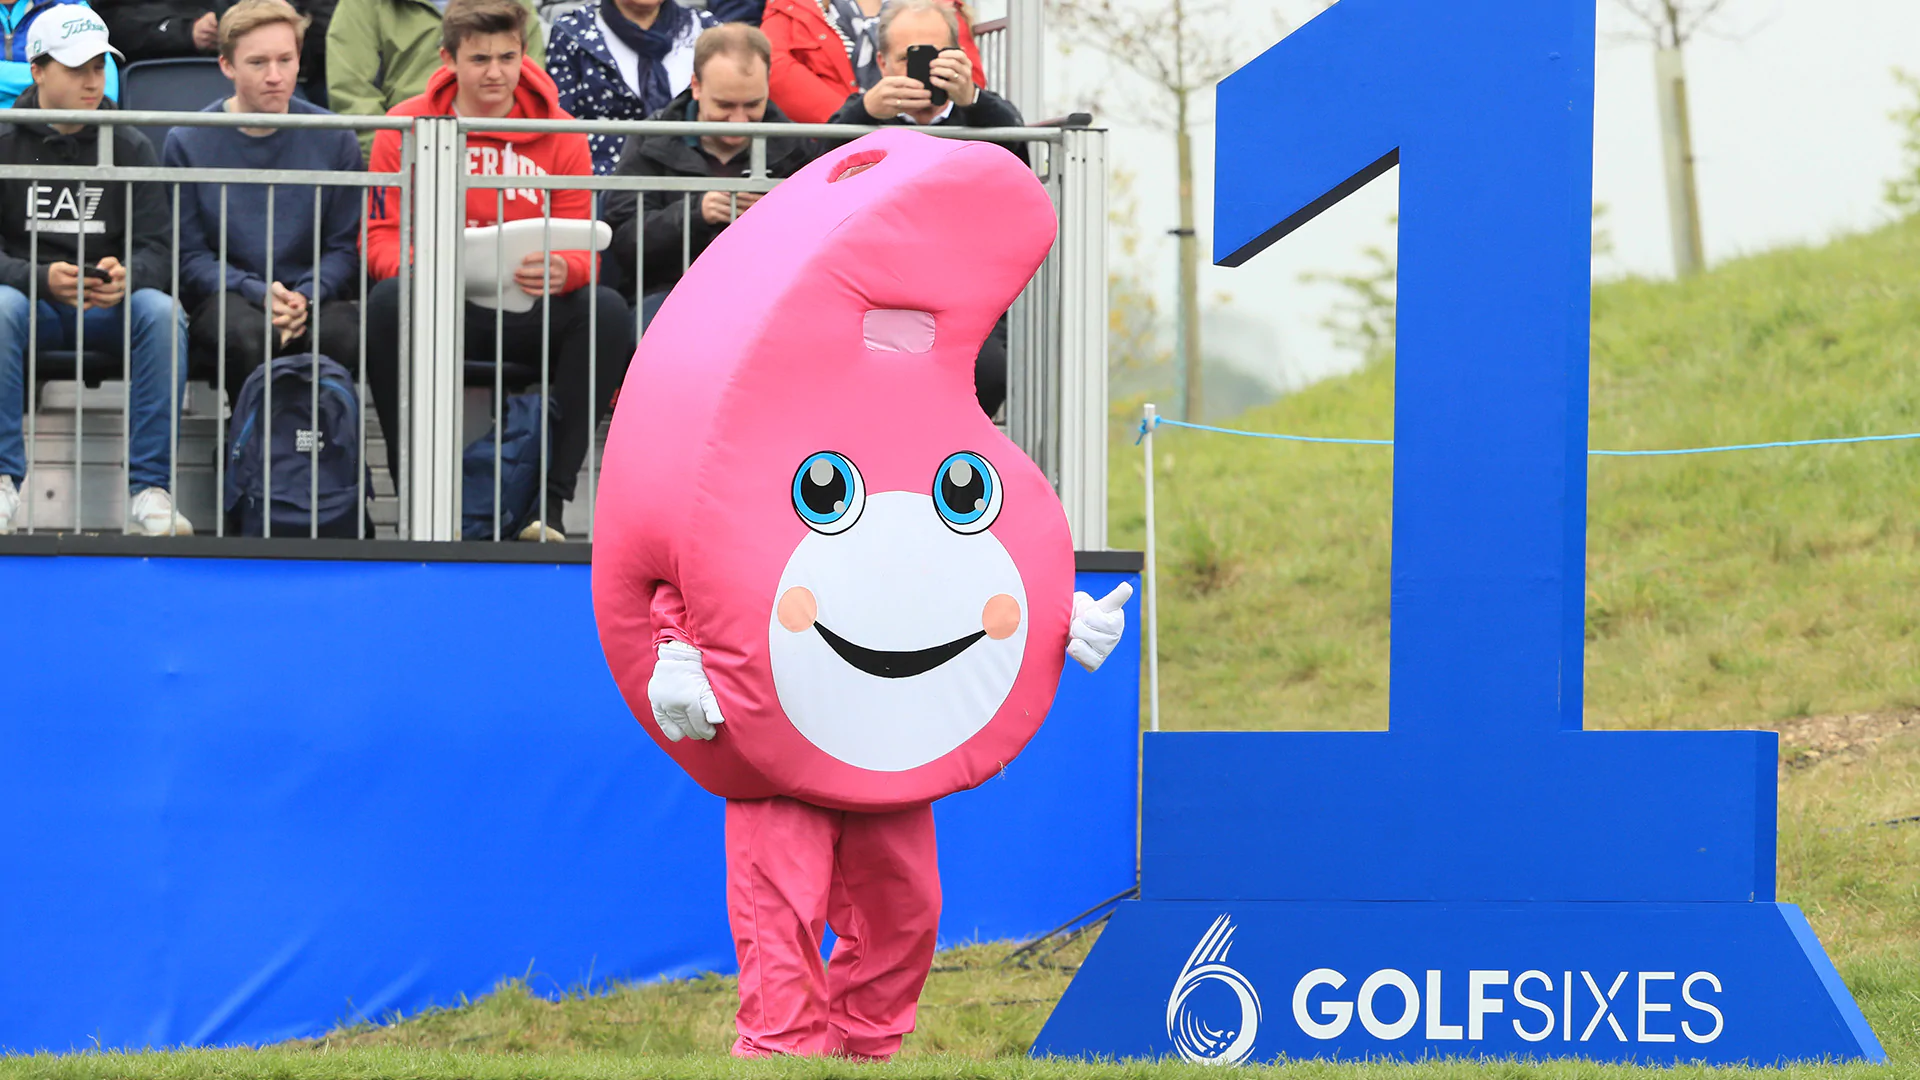 Women added to Euro Tour's GolfSixes event in May